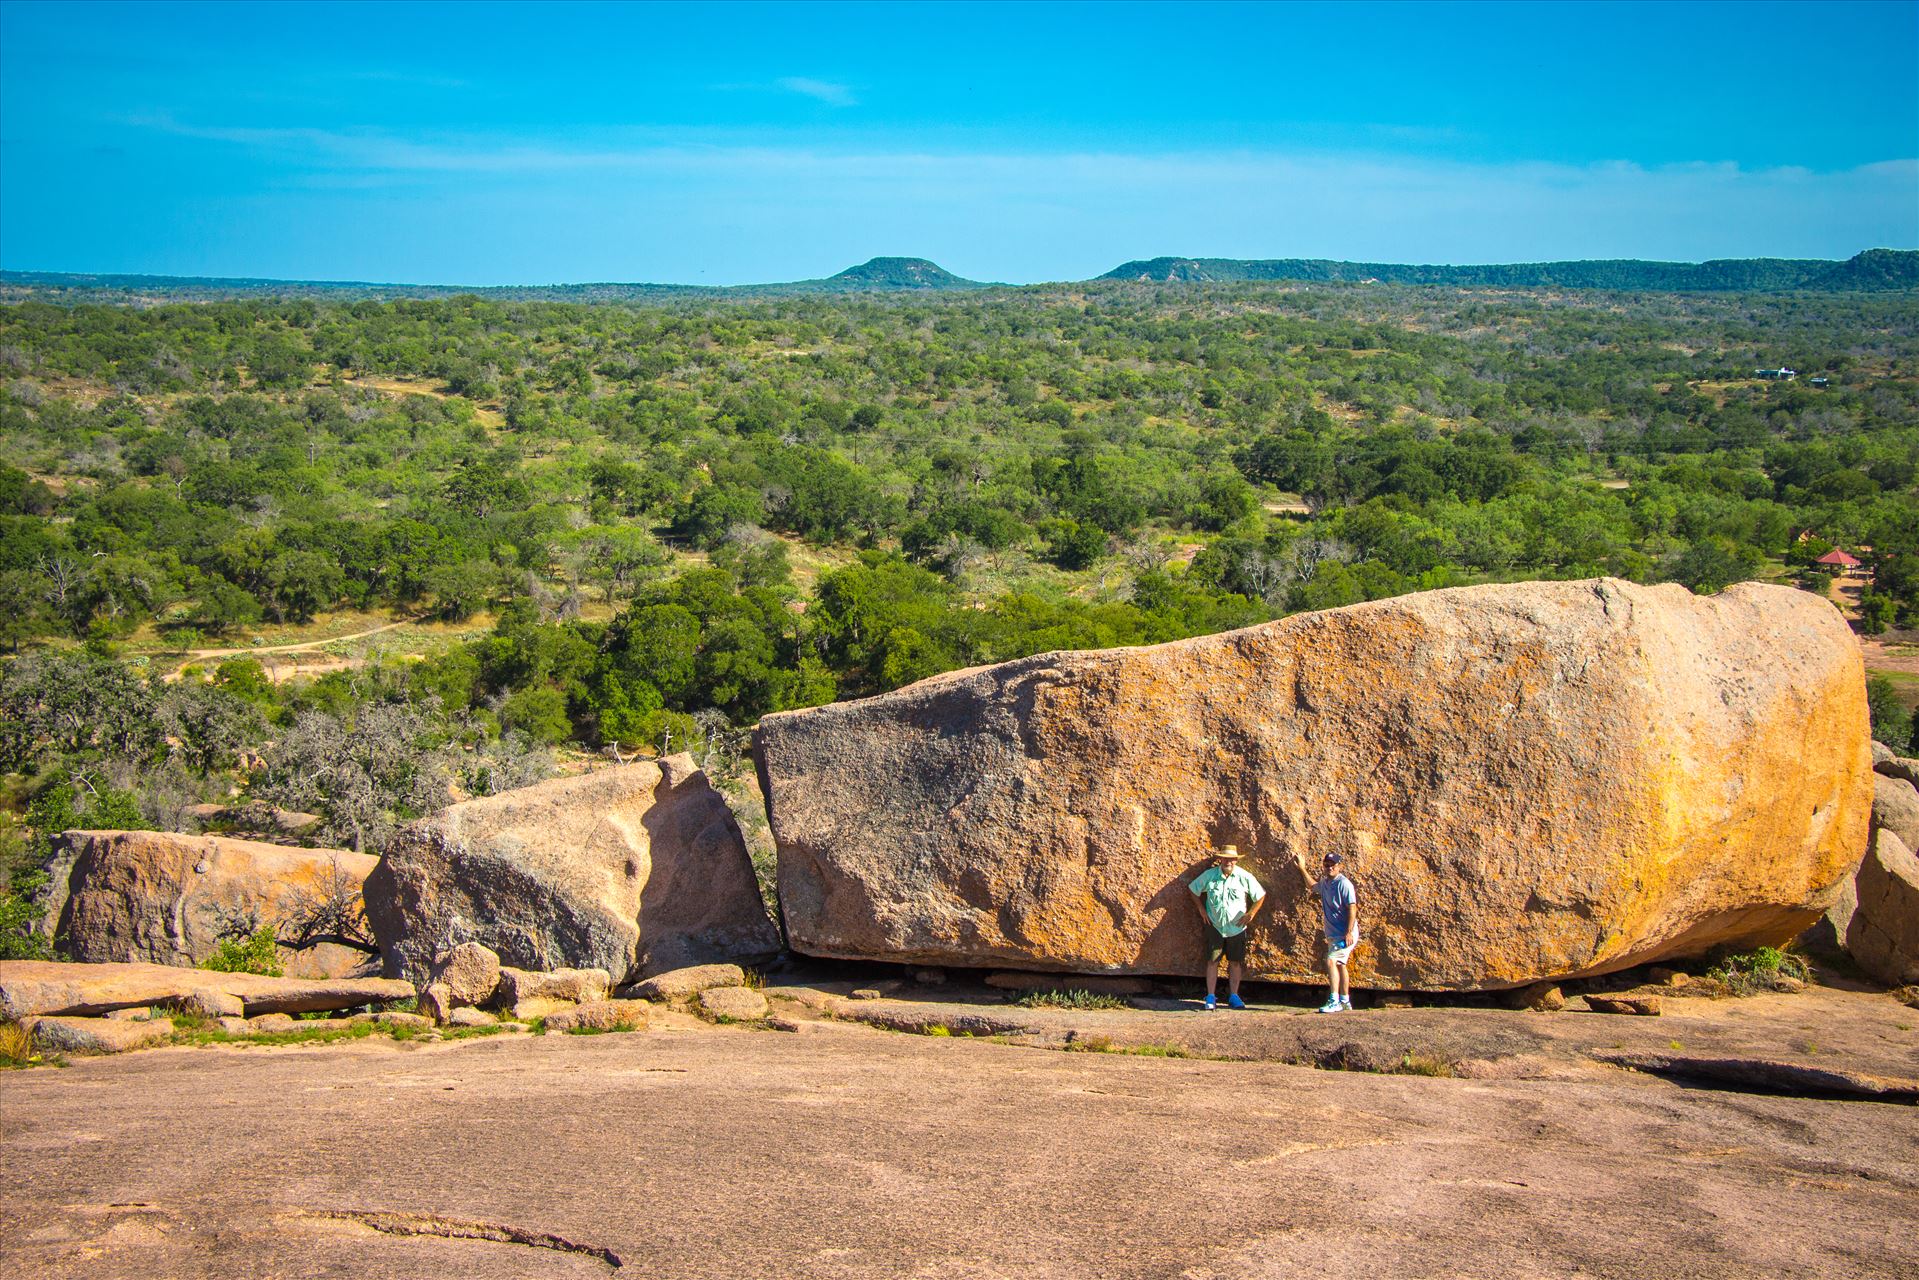 20130723-Enchanted Rock-DSLR-054.jpg  by Charles Smith Photography